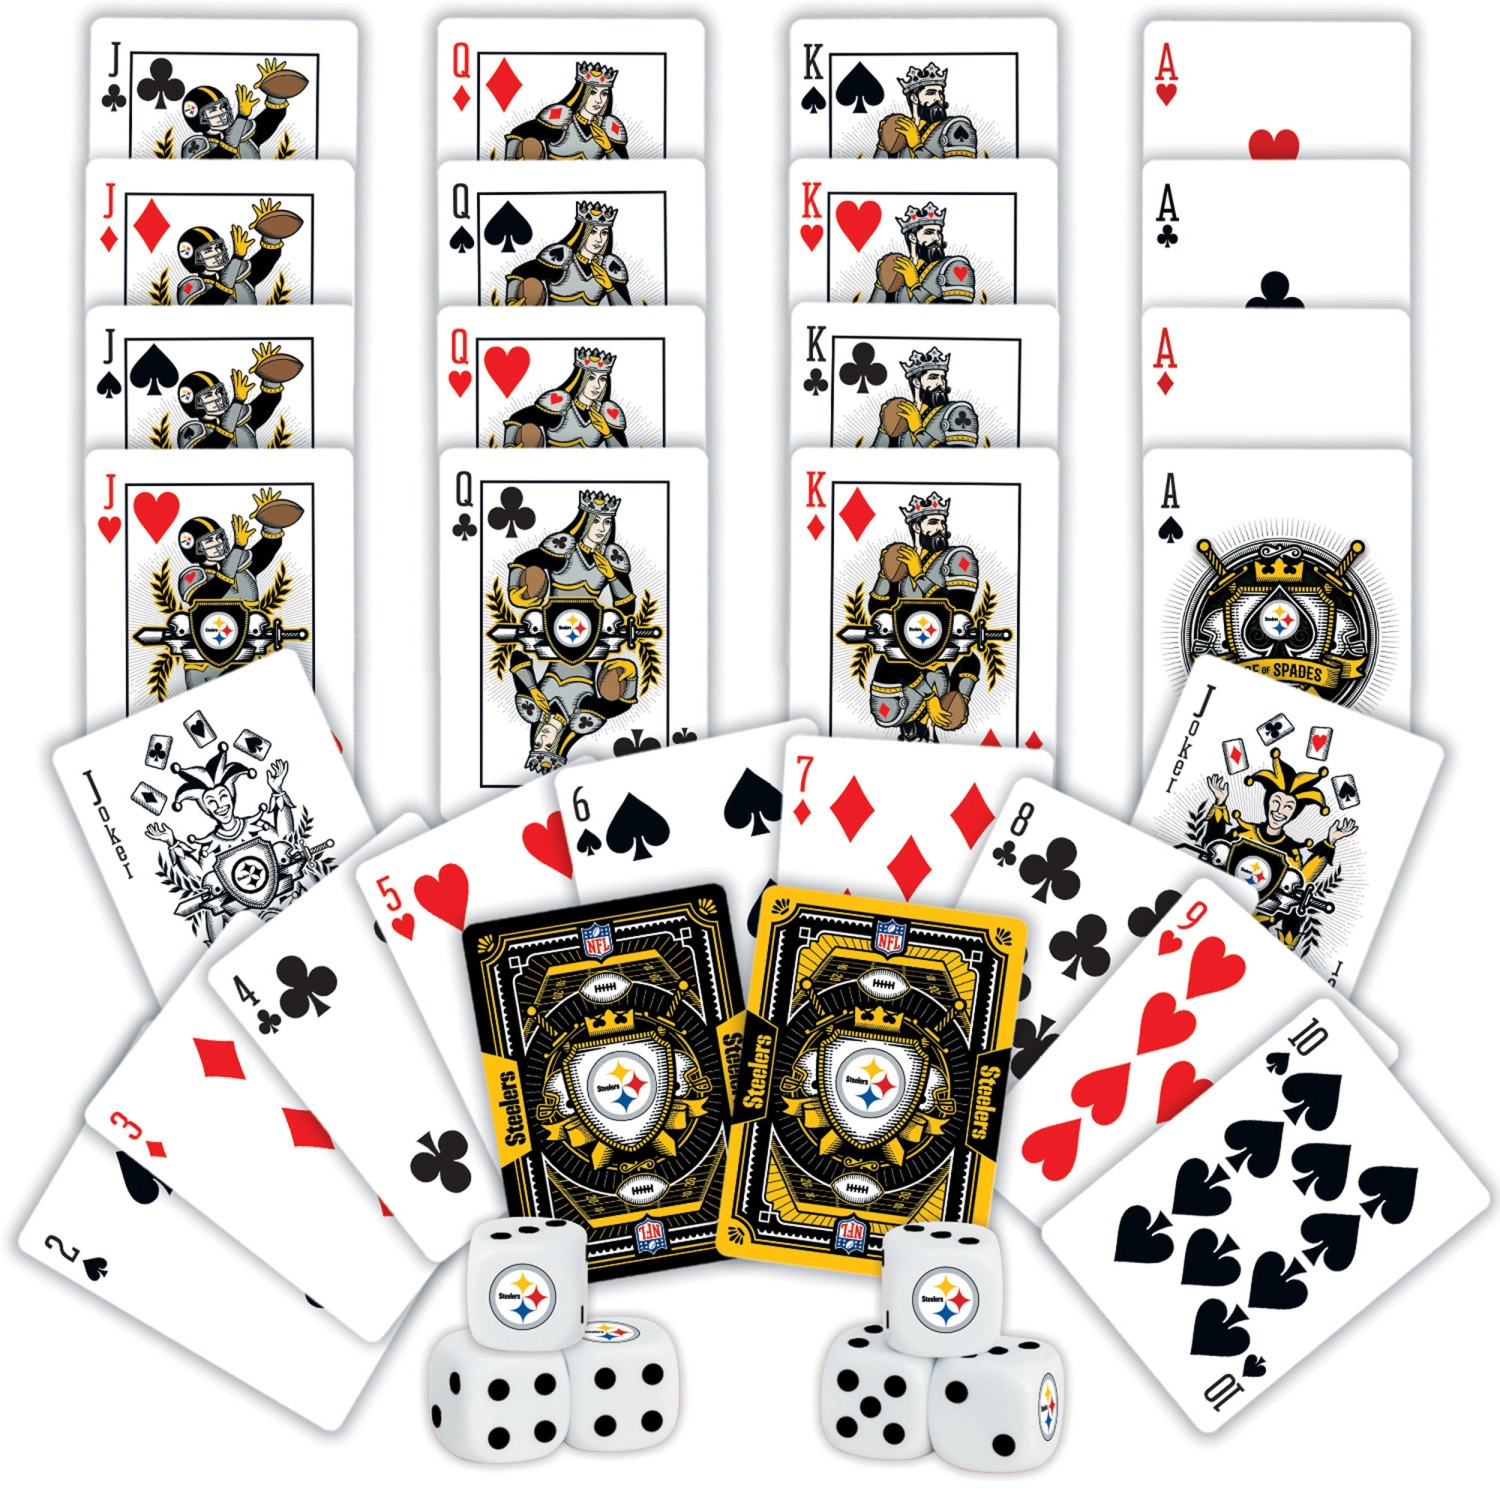 Pittsburgh Steelers Nfl 2-pack Playing Cards & Dice Set